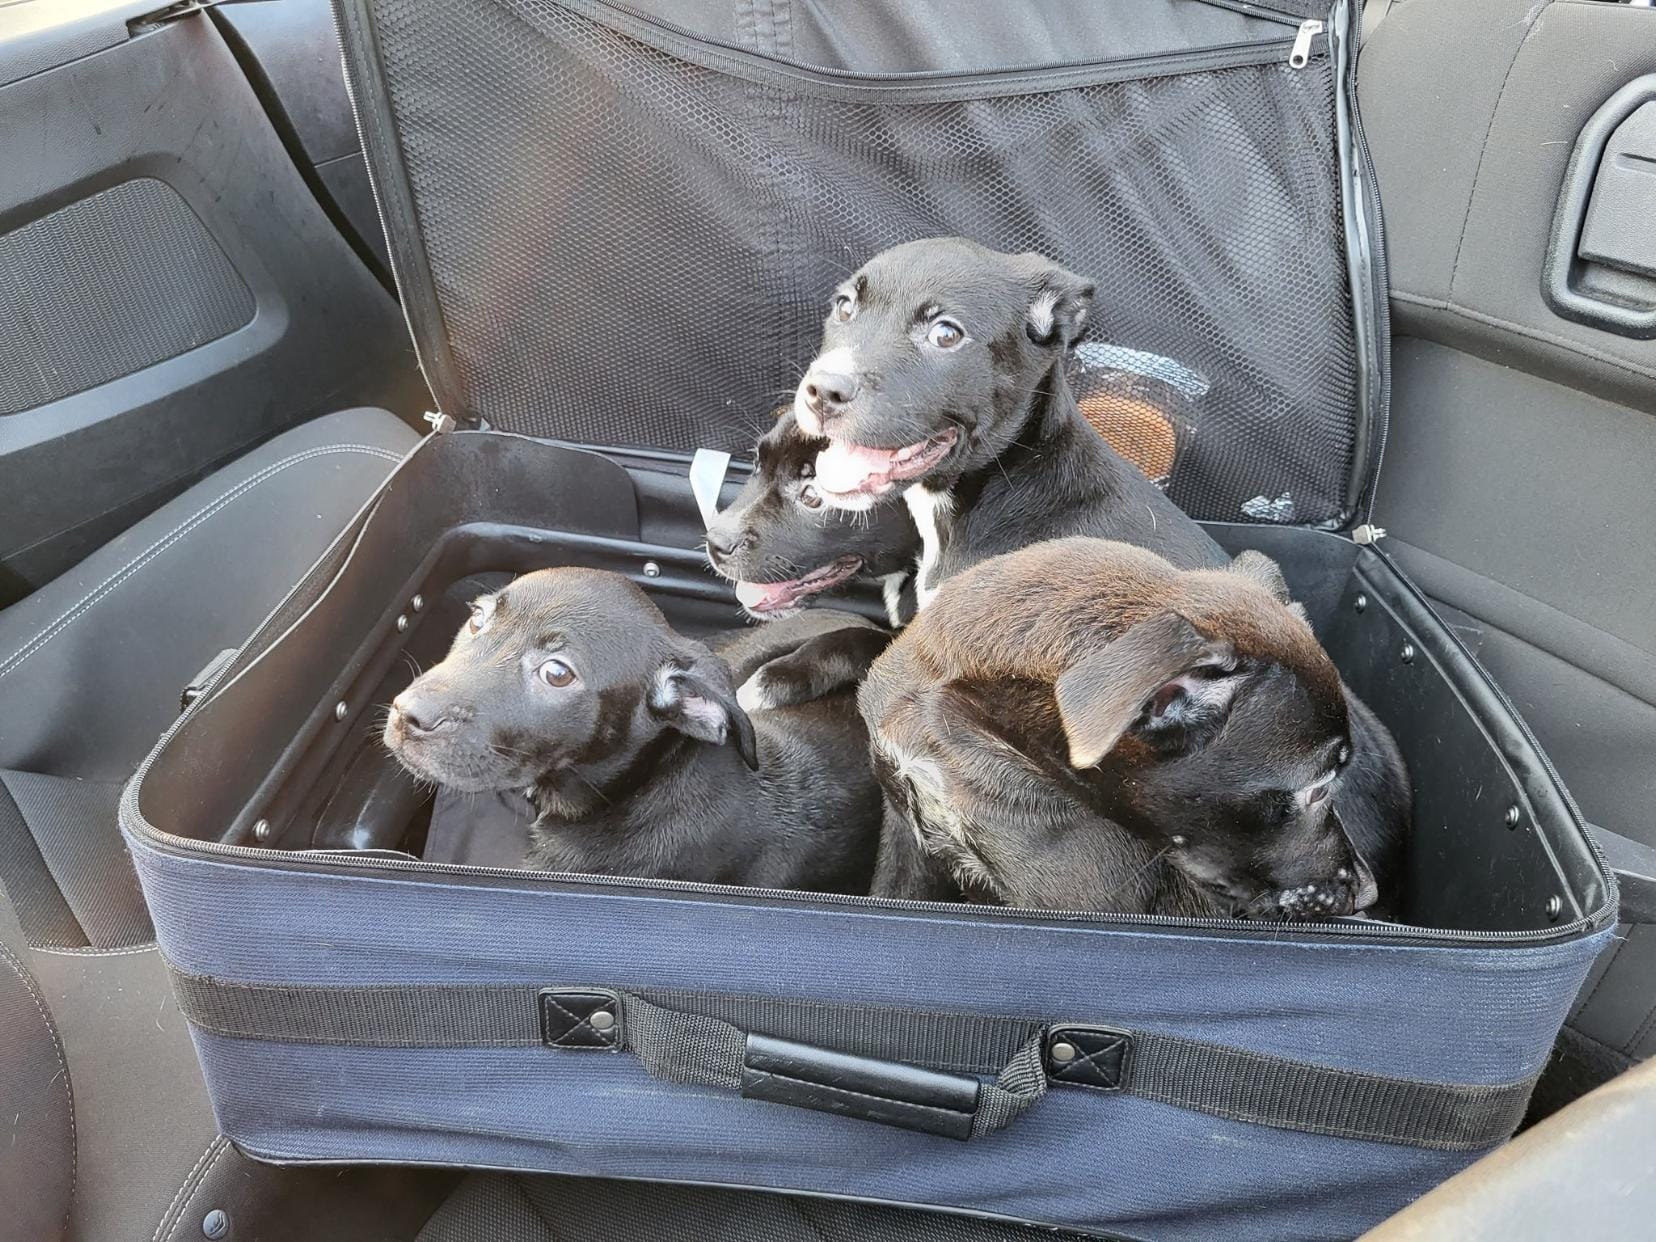 Puppies found abandoned in zipped suitcase in Guilford County